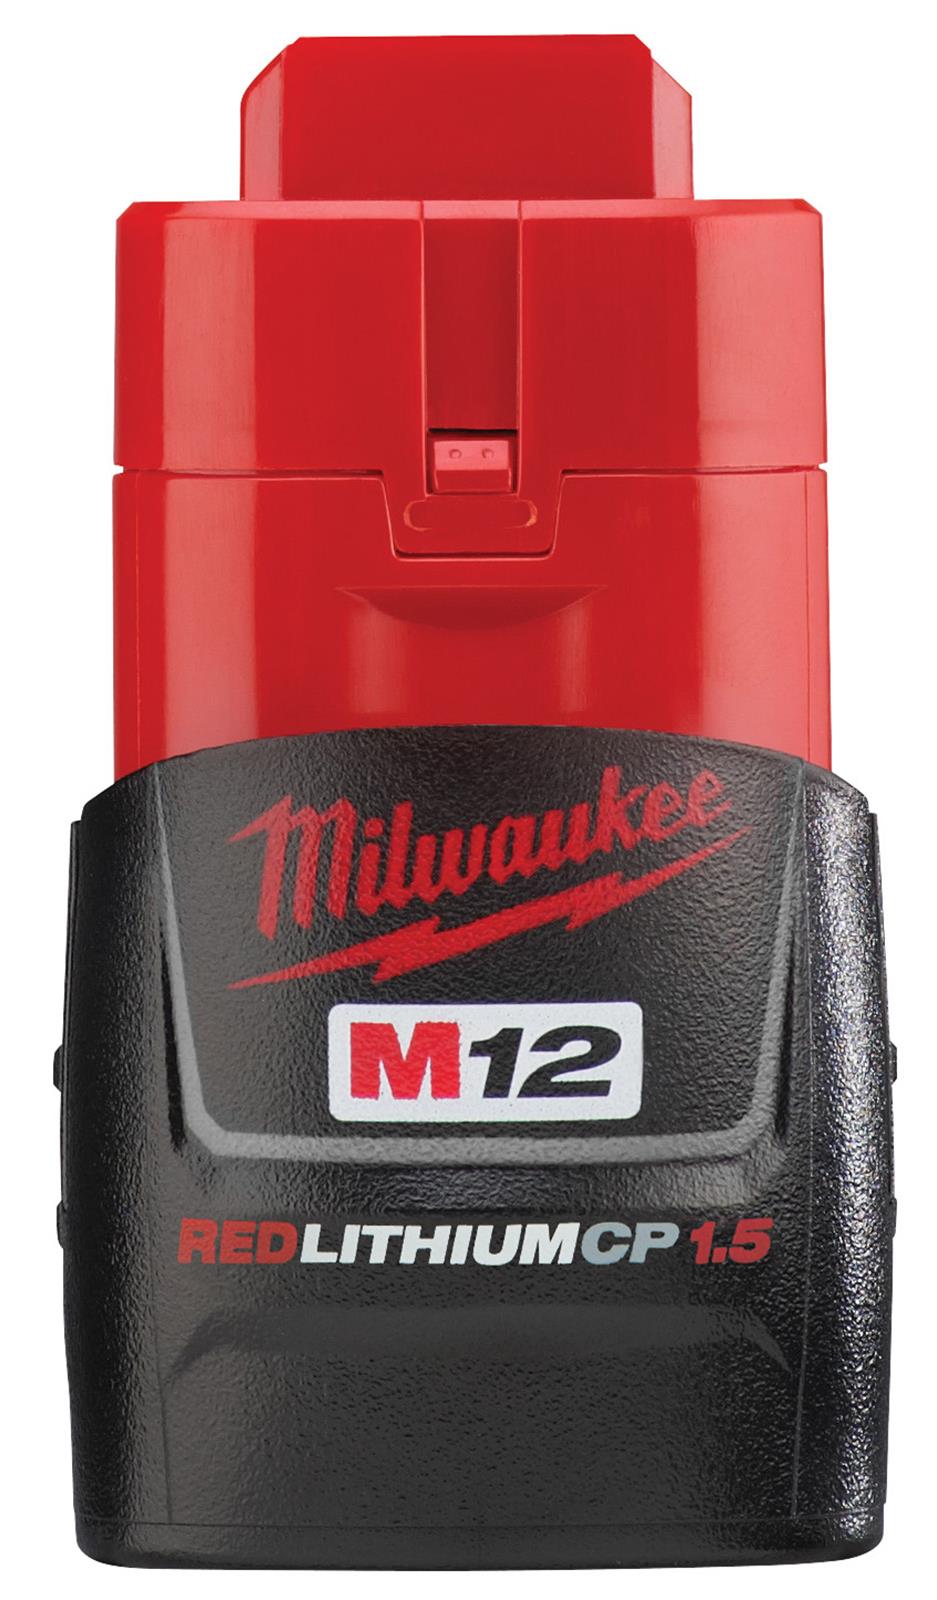 MILWAUKEE M12 GENUINE 48-11-2401 12V 1.5AH 18WAH RED LITHIUM LION BATTERY NEW! 